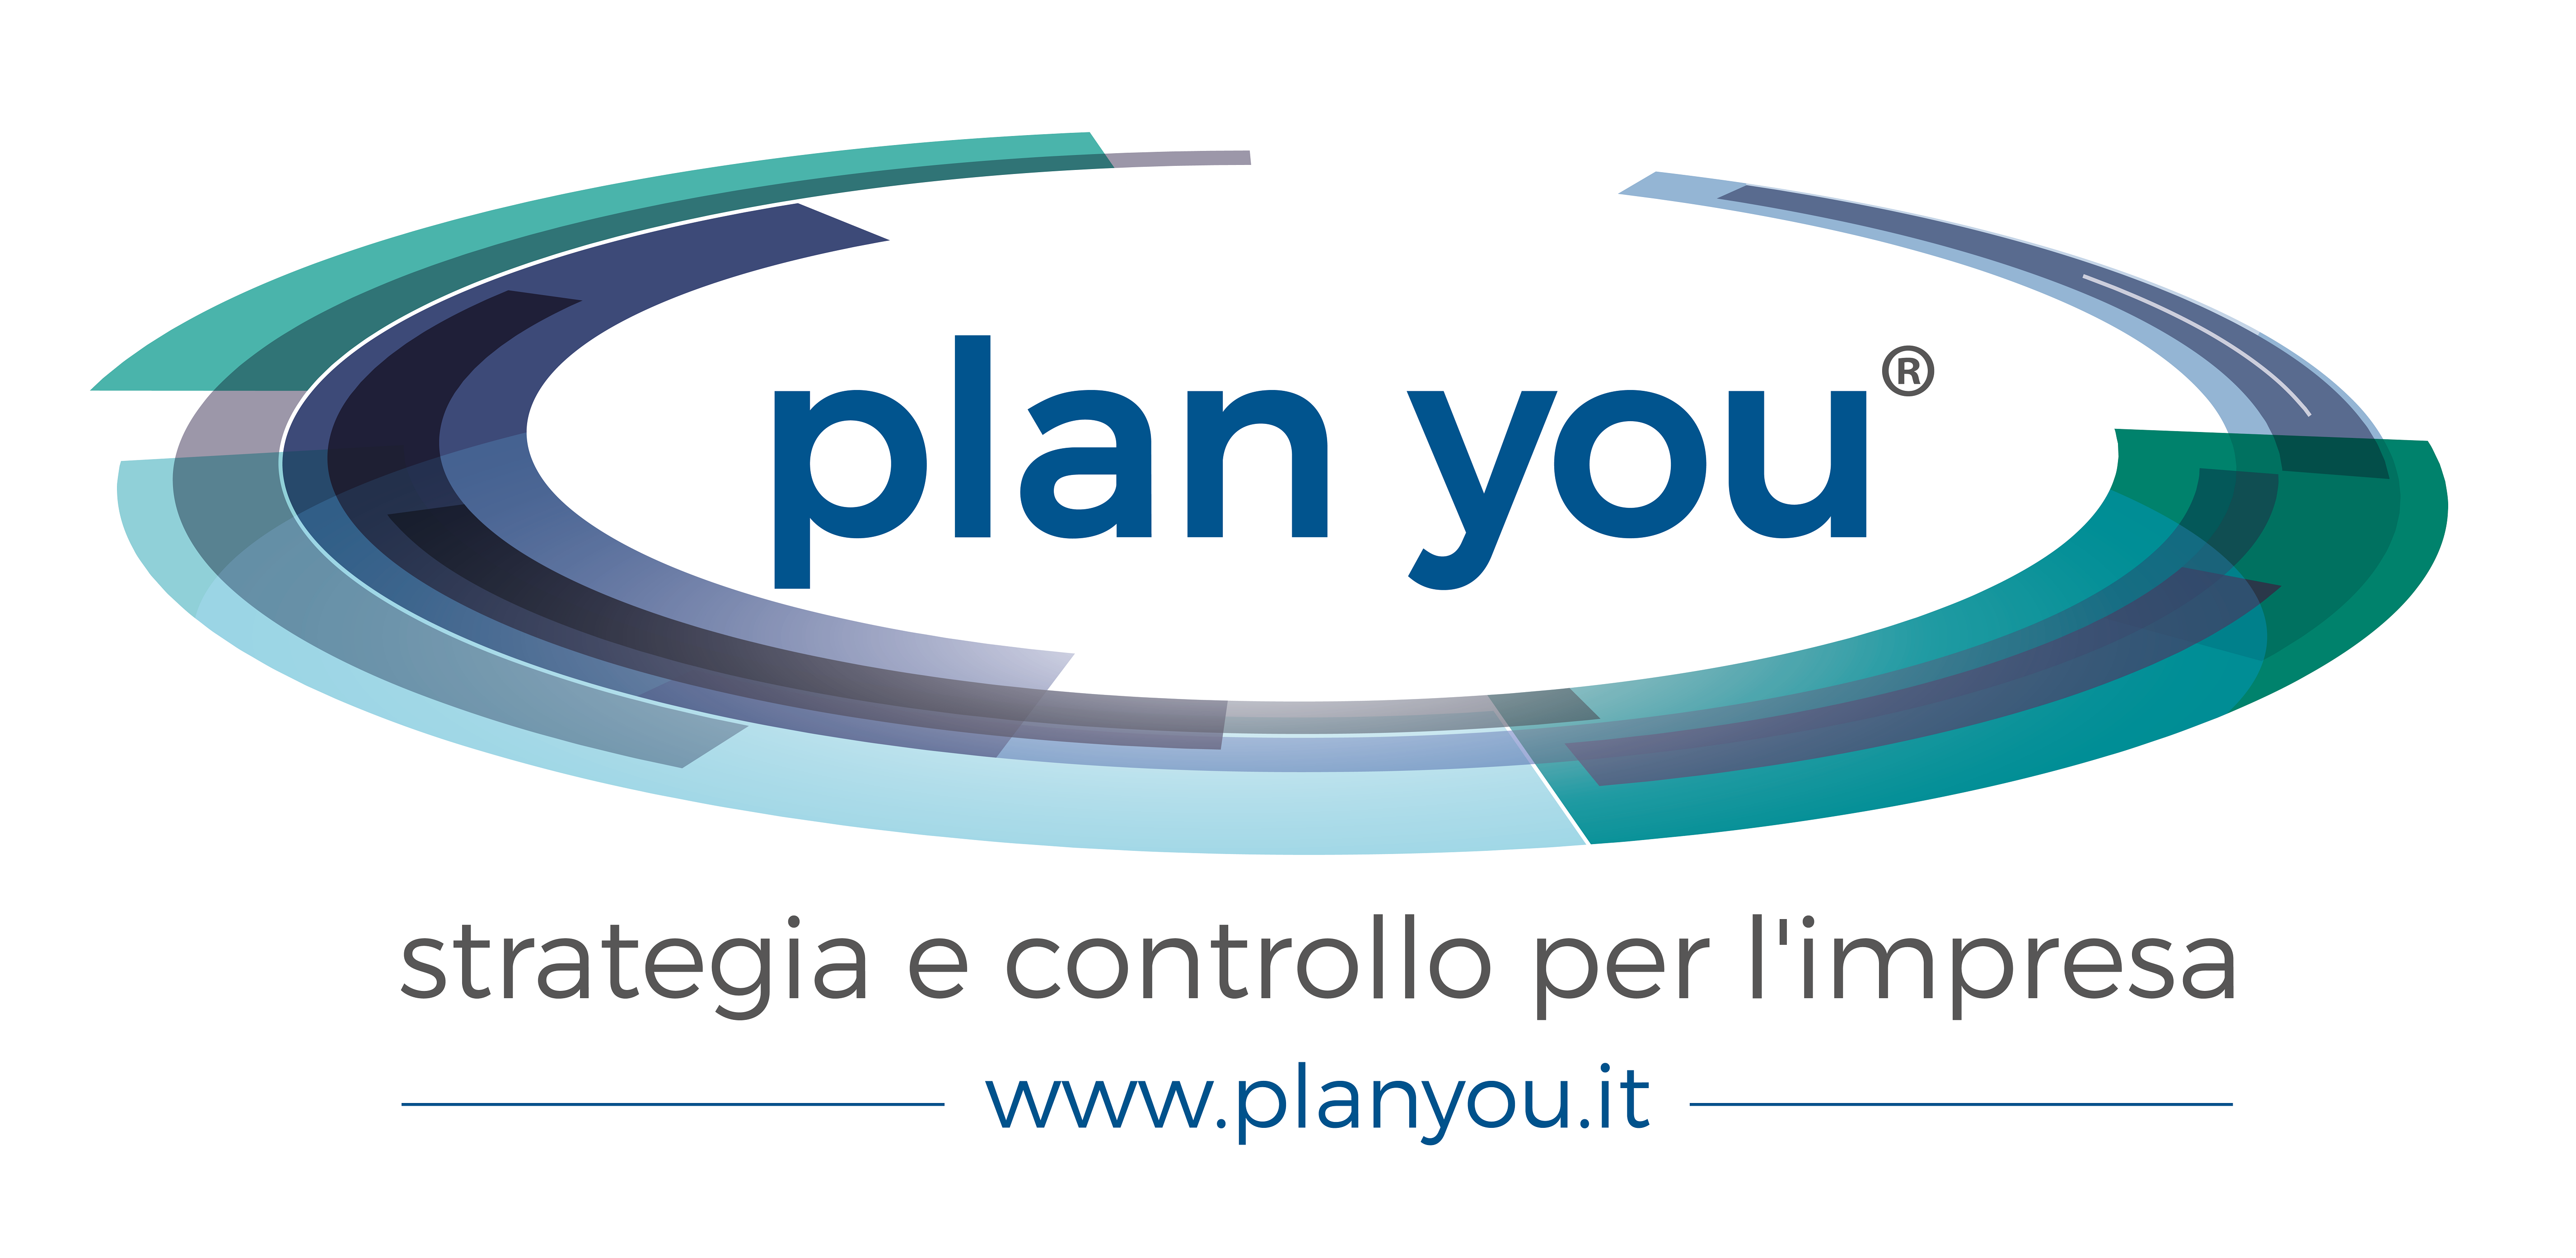 Planyou